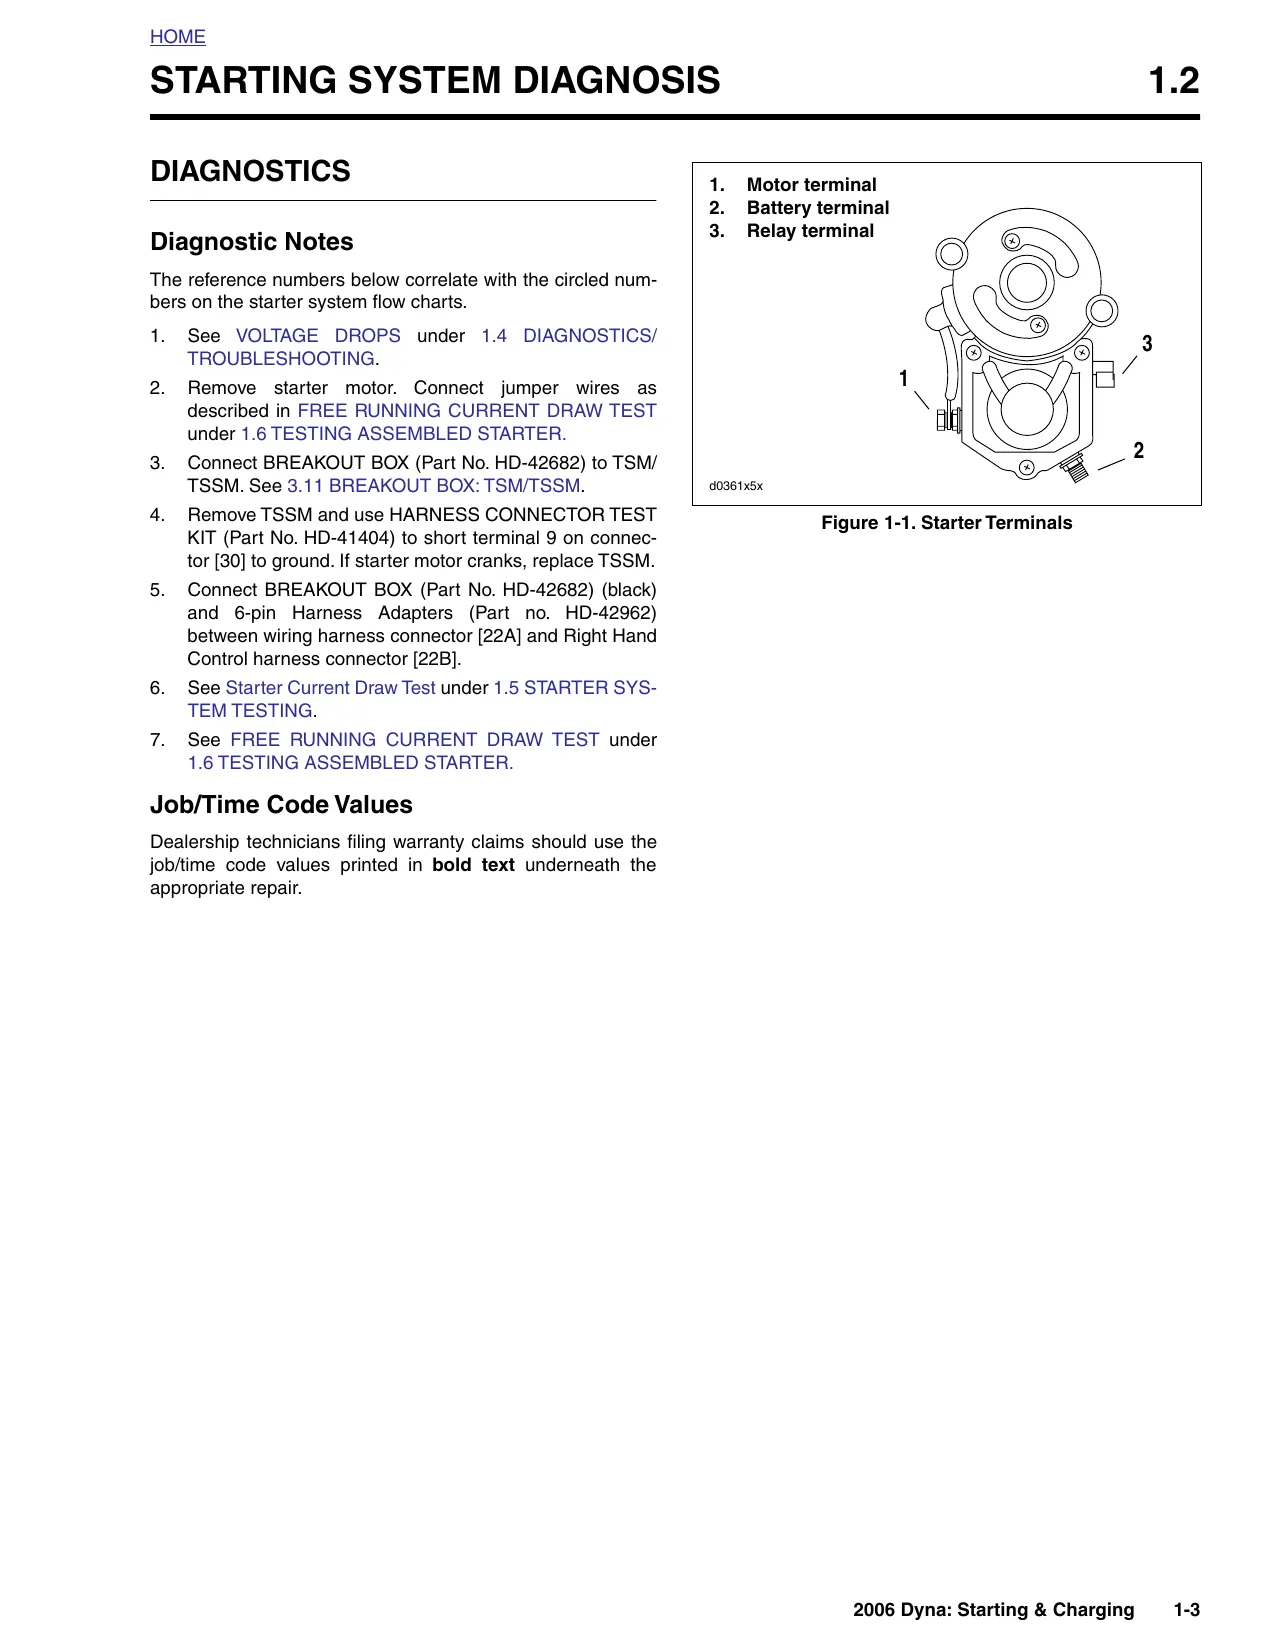 2006 Harley Davidson Dyna, Super, Wide, Glide, FXD repair manual Preview image 3